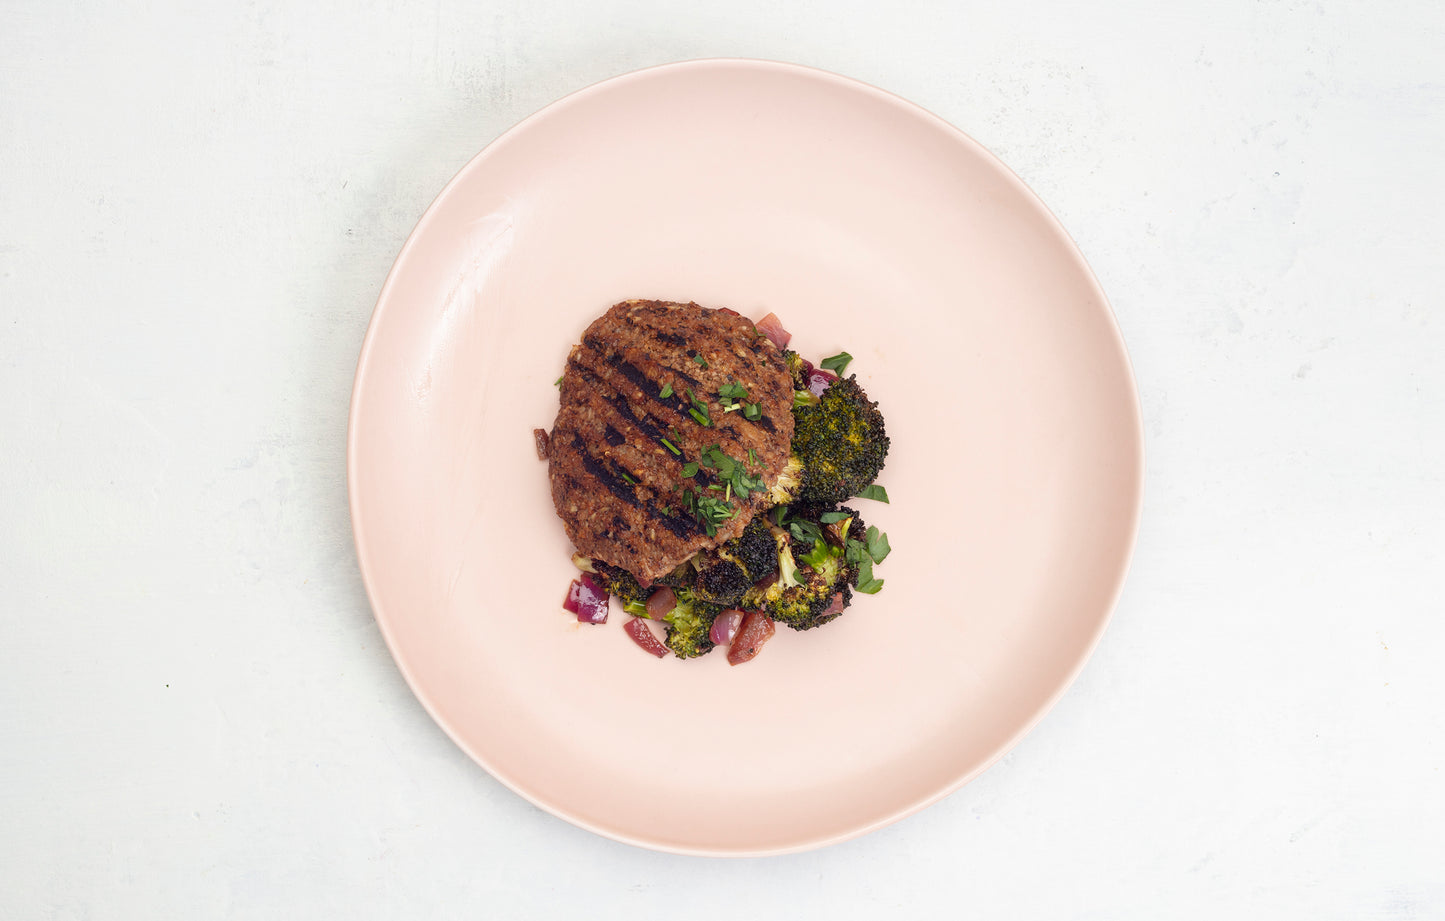 Grilled Vegan Mushroom Burger with Broccoli and Red Onion Salad